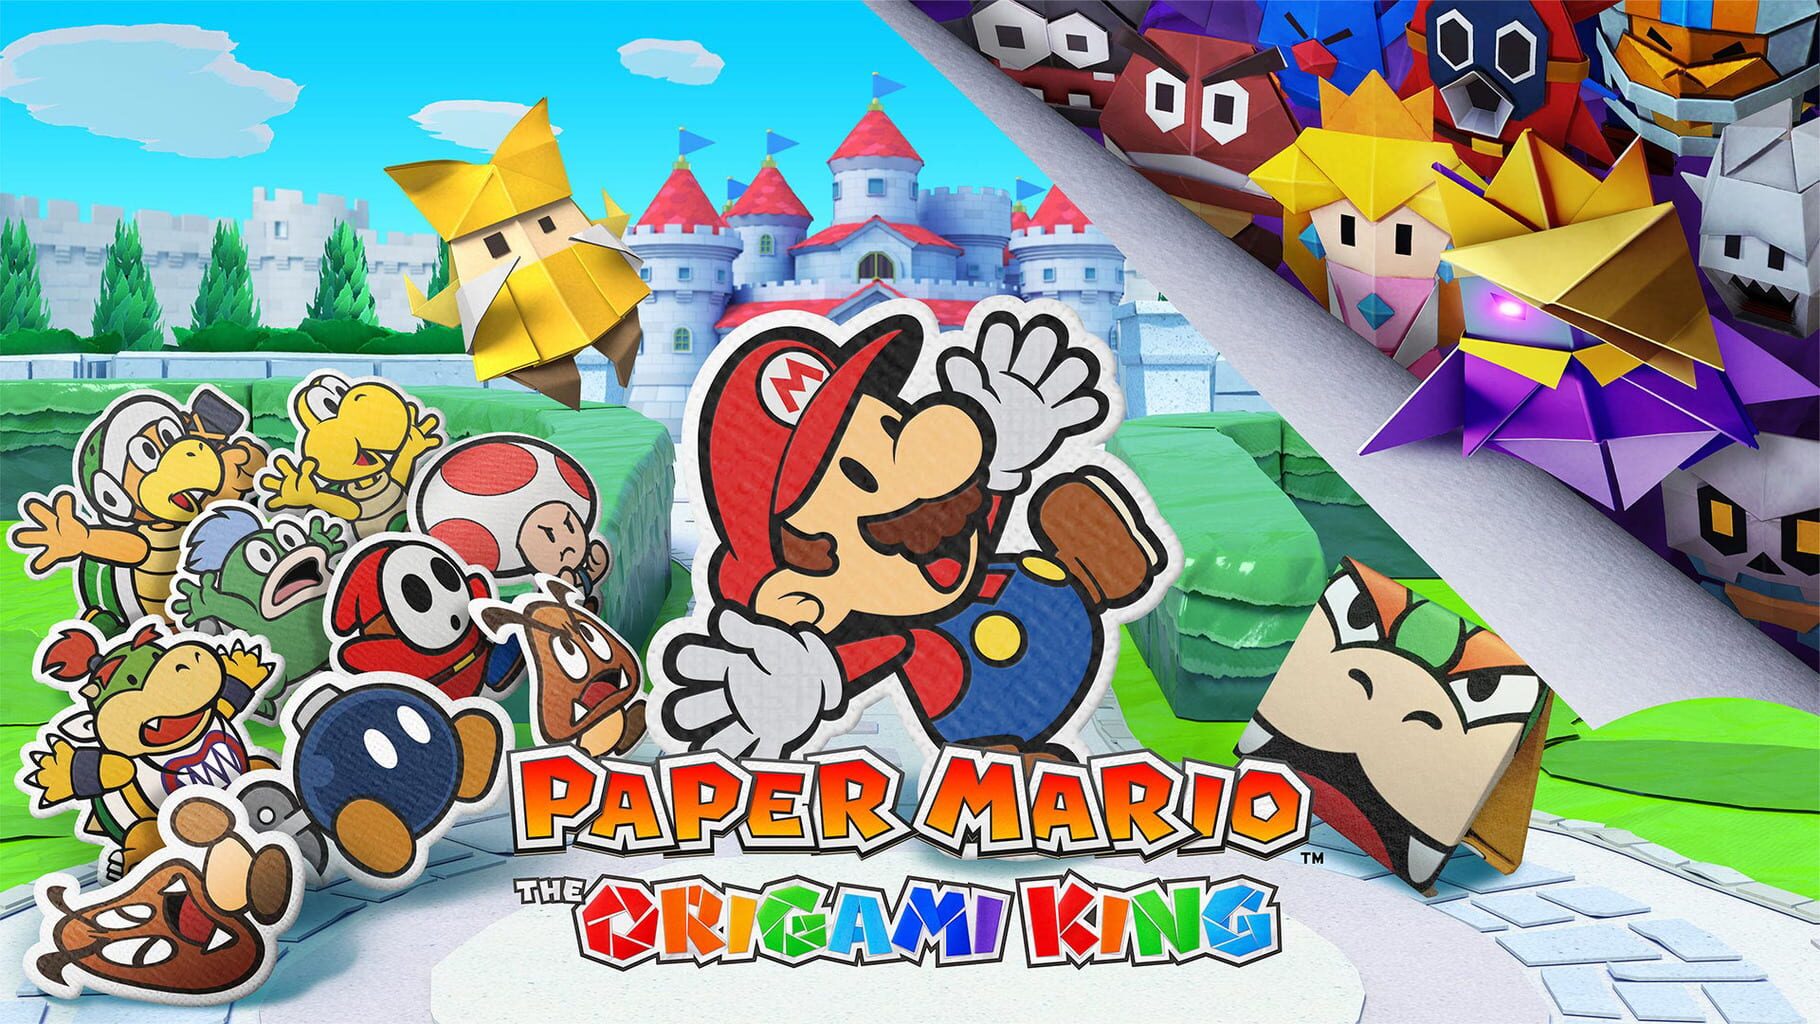 Artwork for Paper Mario: The Origami King